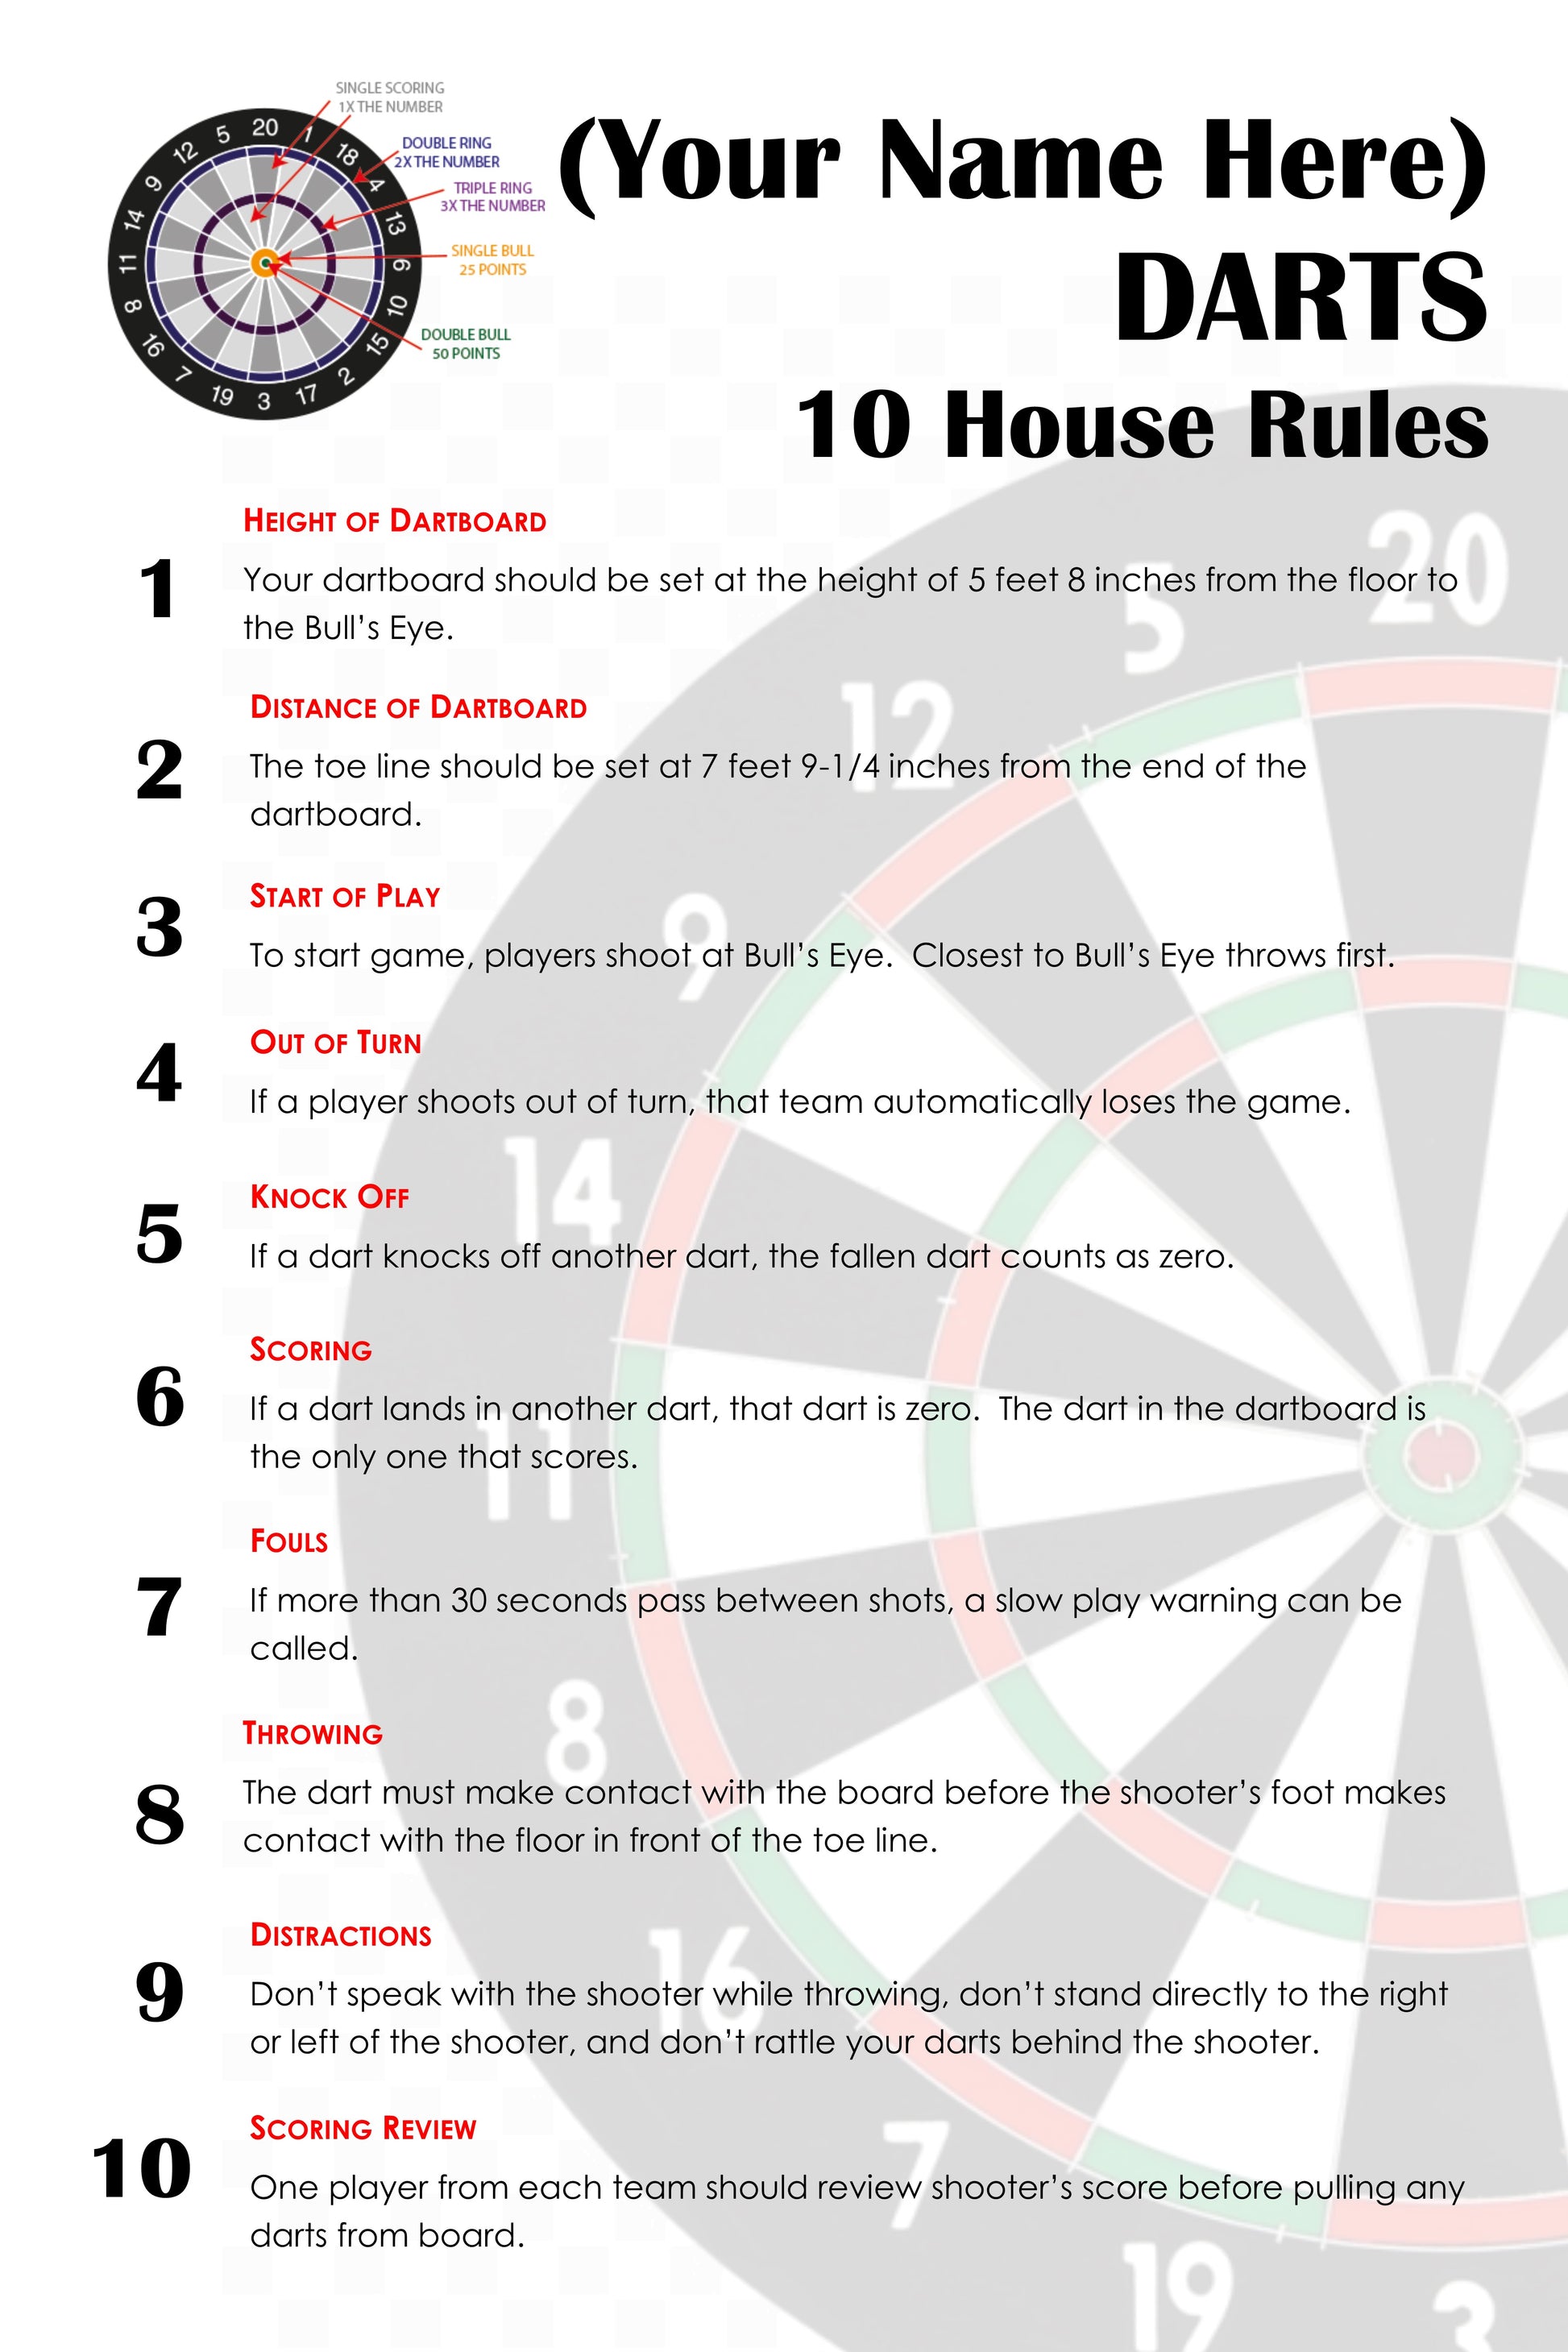 10 House Rules for Darts Personalized and Customized With Your Name